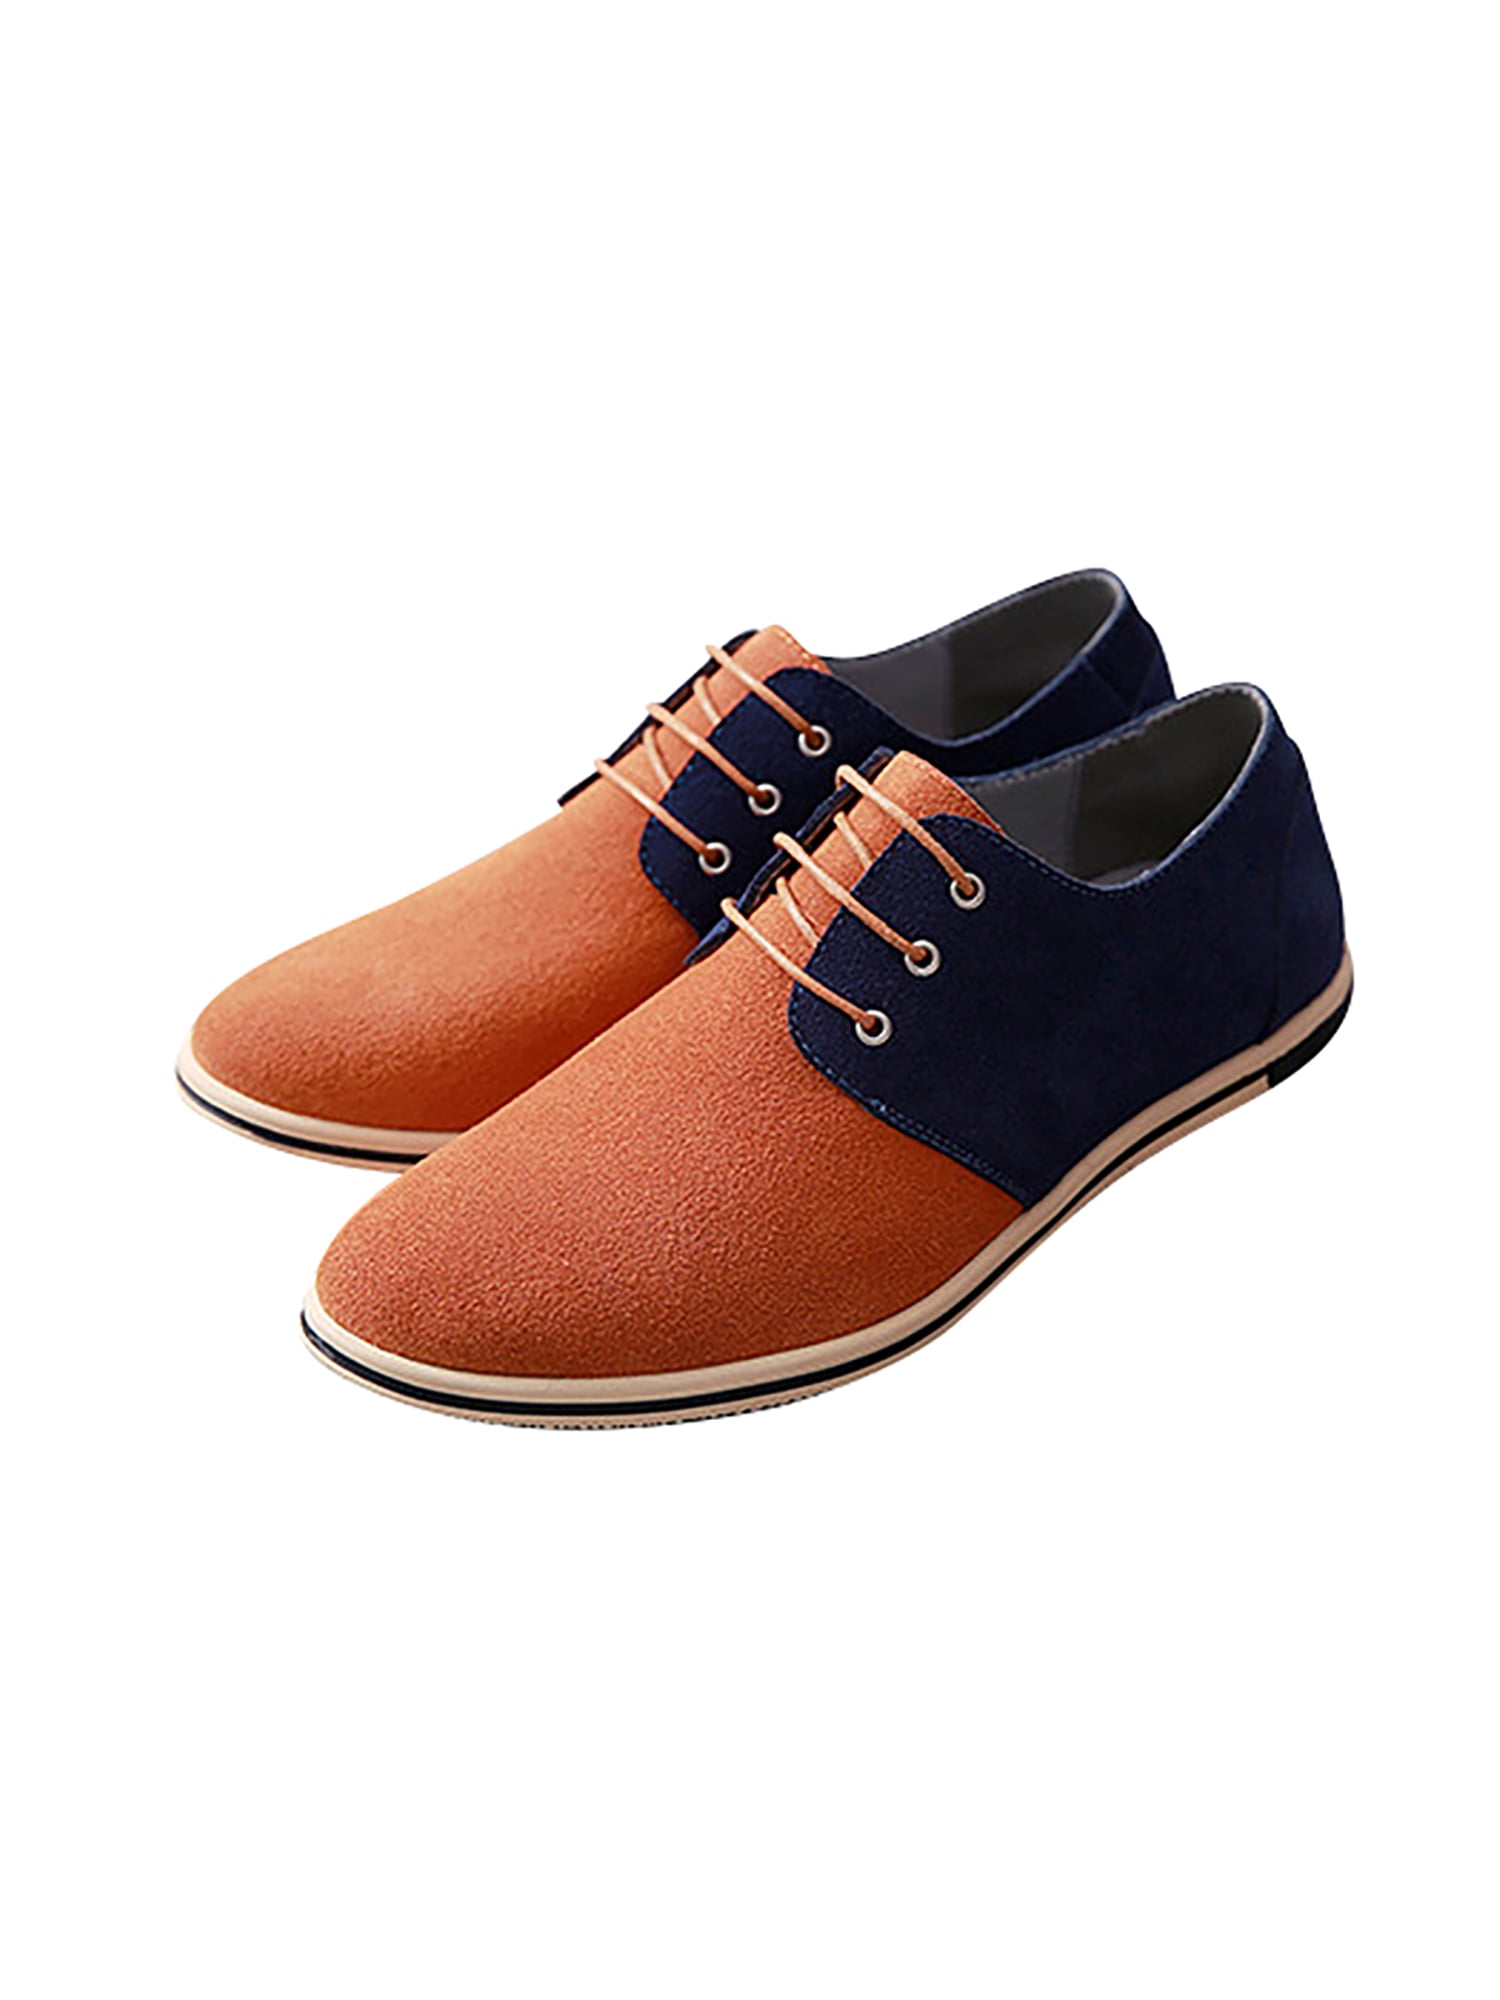 Details about   New Mens Dress Oxfords Flat Round Toe Leather Vintage Casual Work Business Shoes 